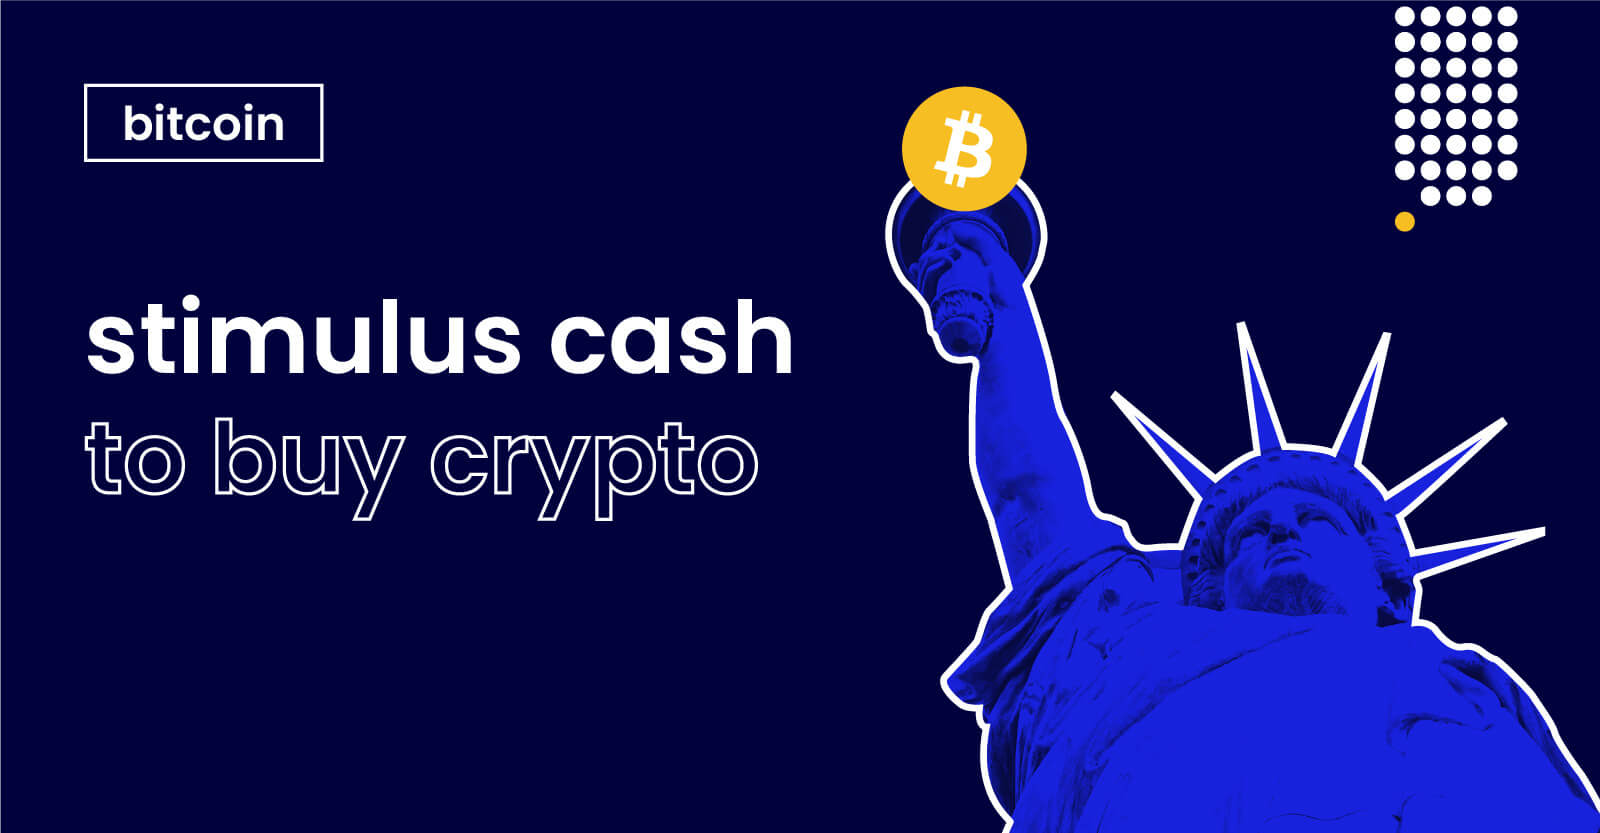 buy bitcoin with stimulus check